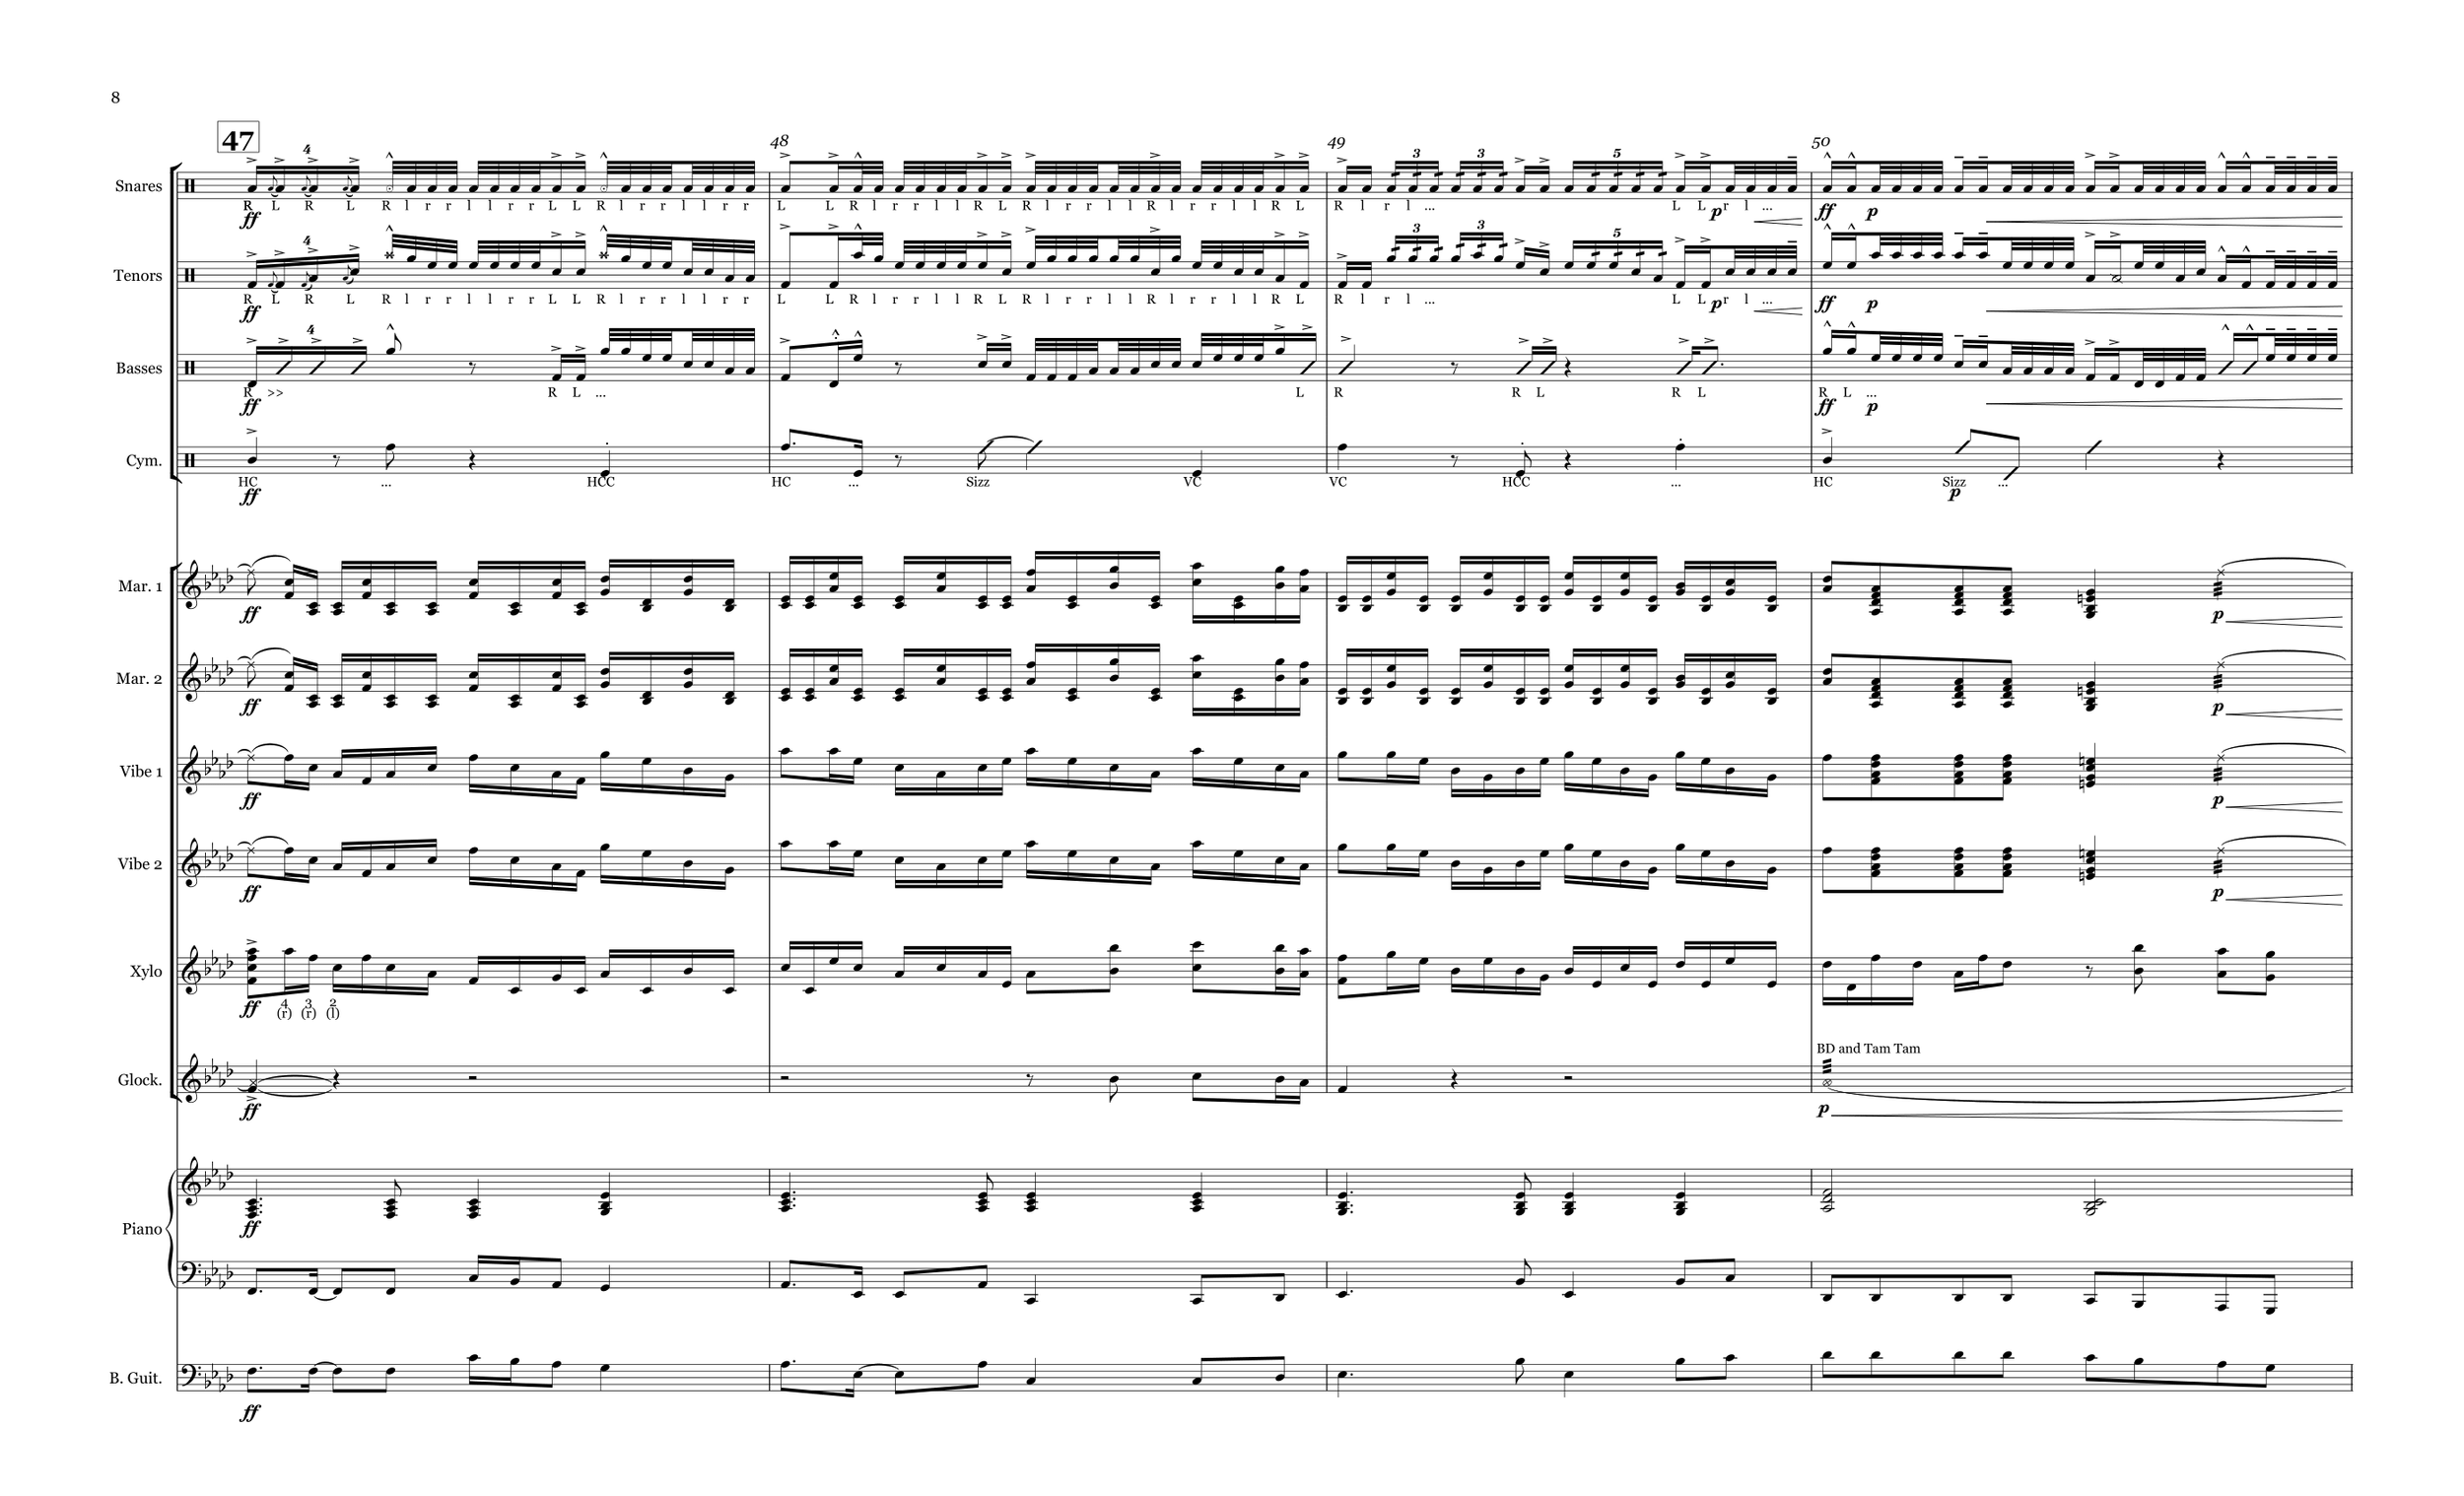 Stand Up Percussion Score Final - Full Score (legal for YT)-08.png